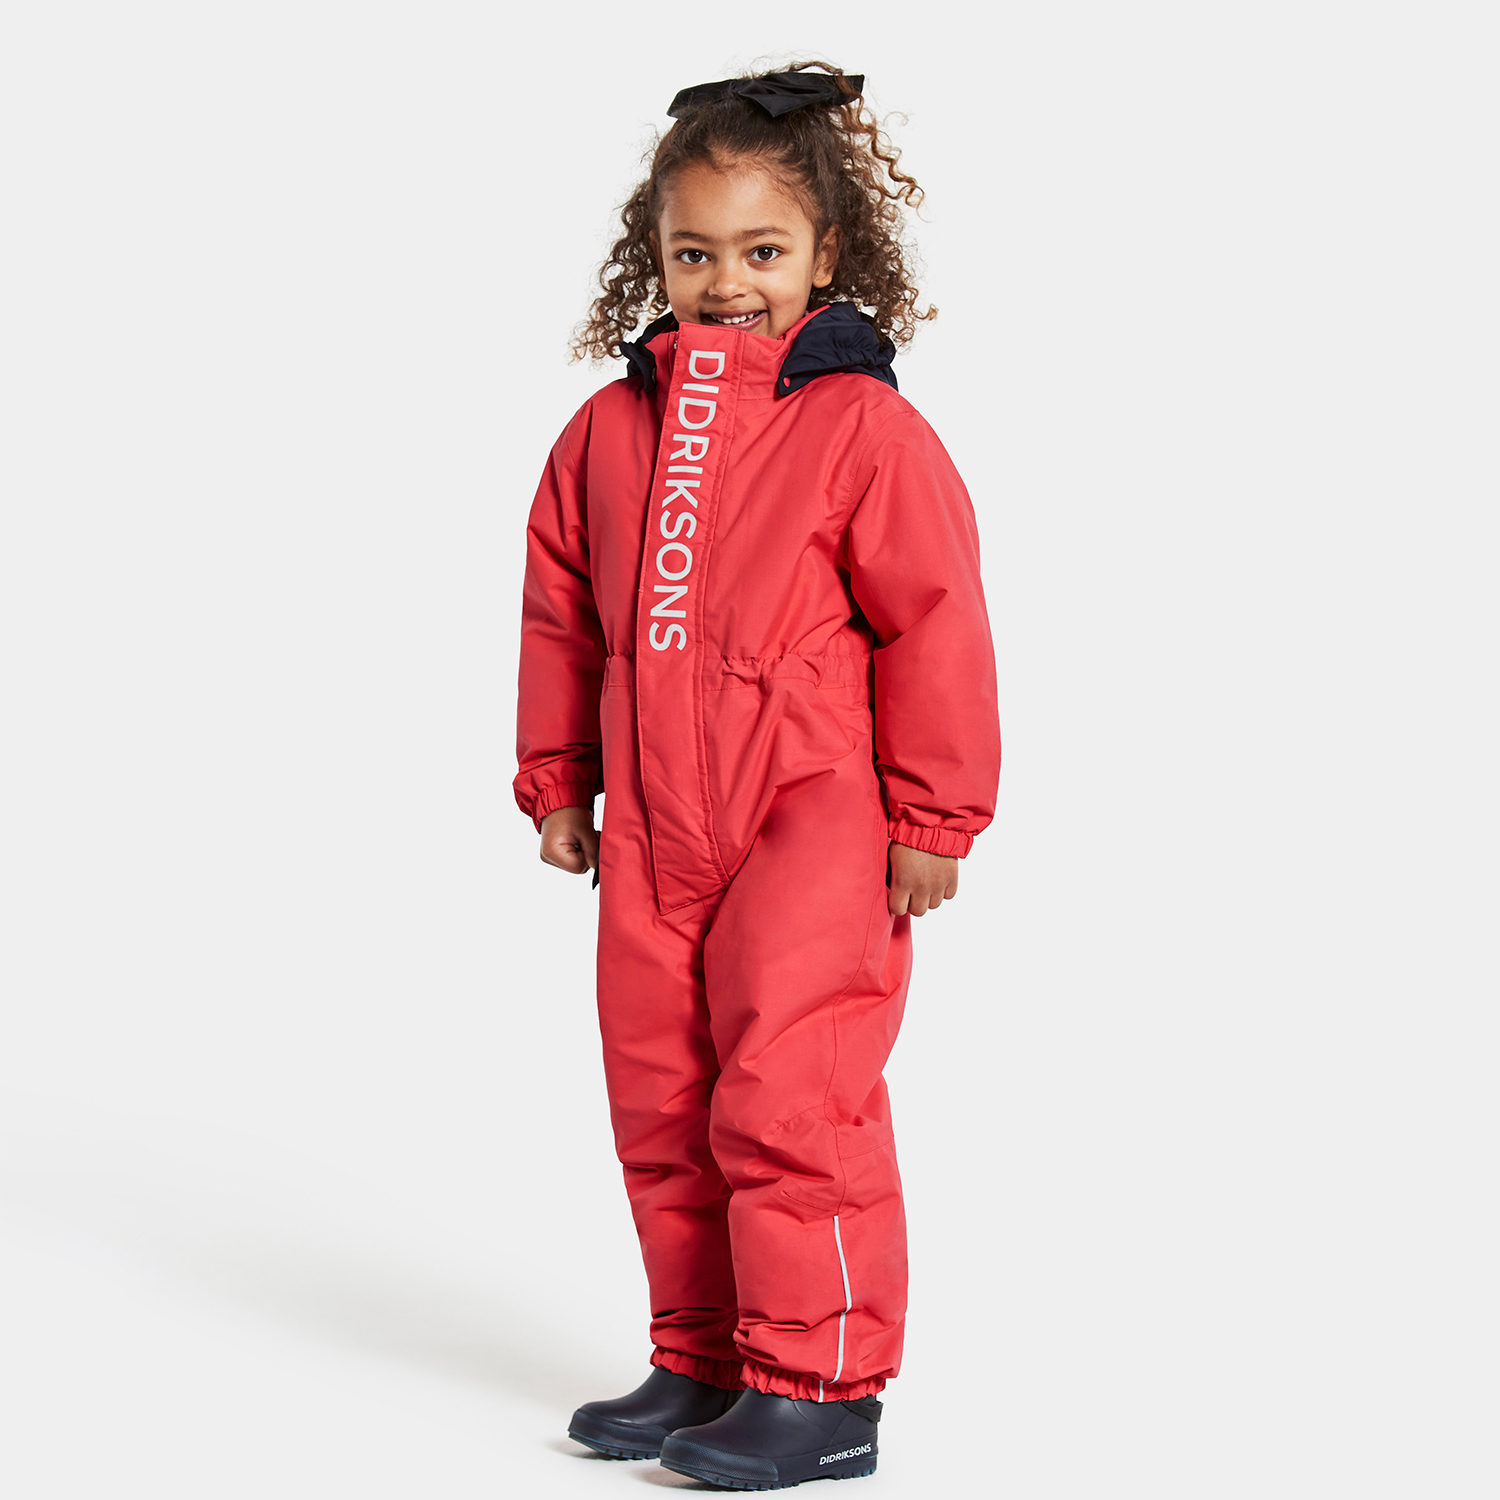 rio_kids_coverall_504402_502_10front2_m222.jpg